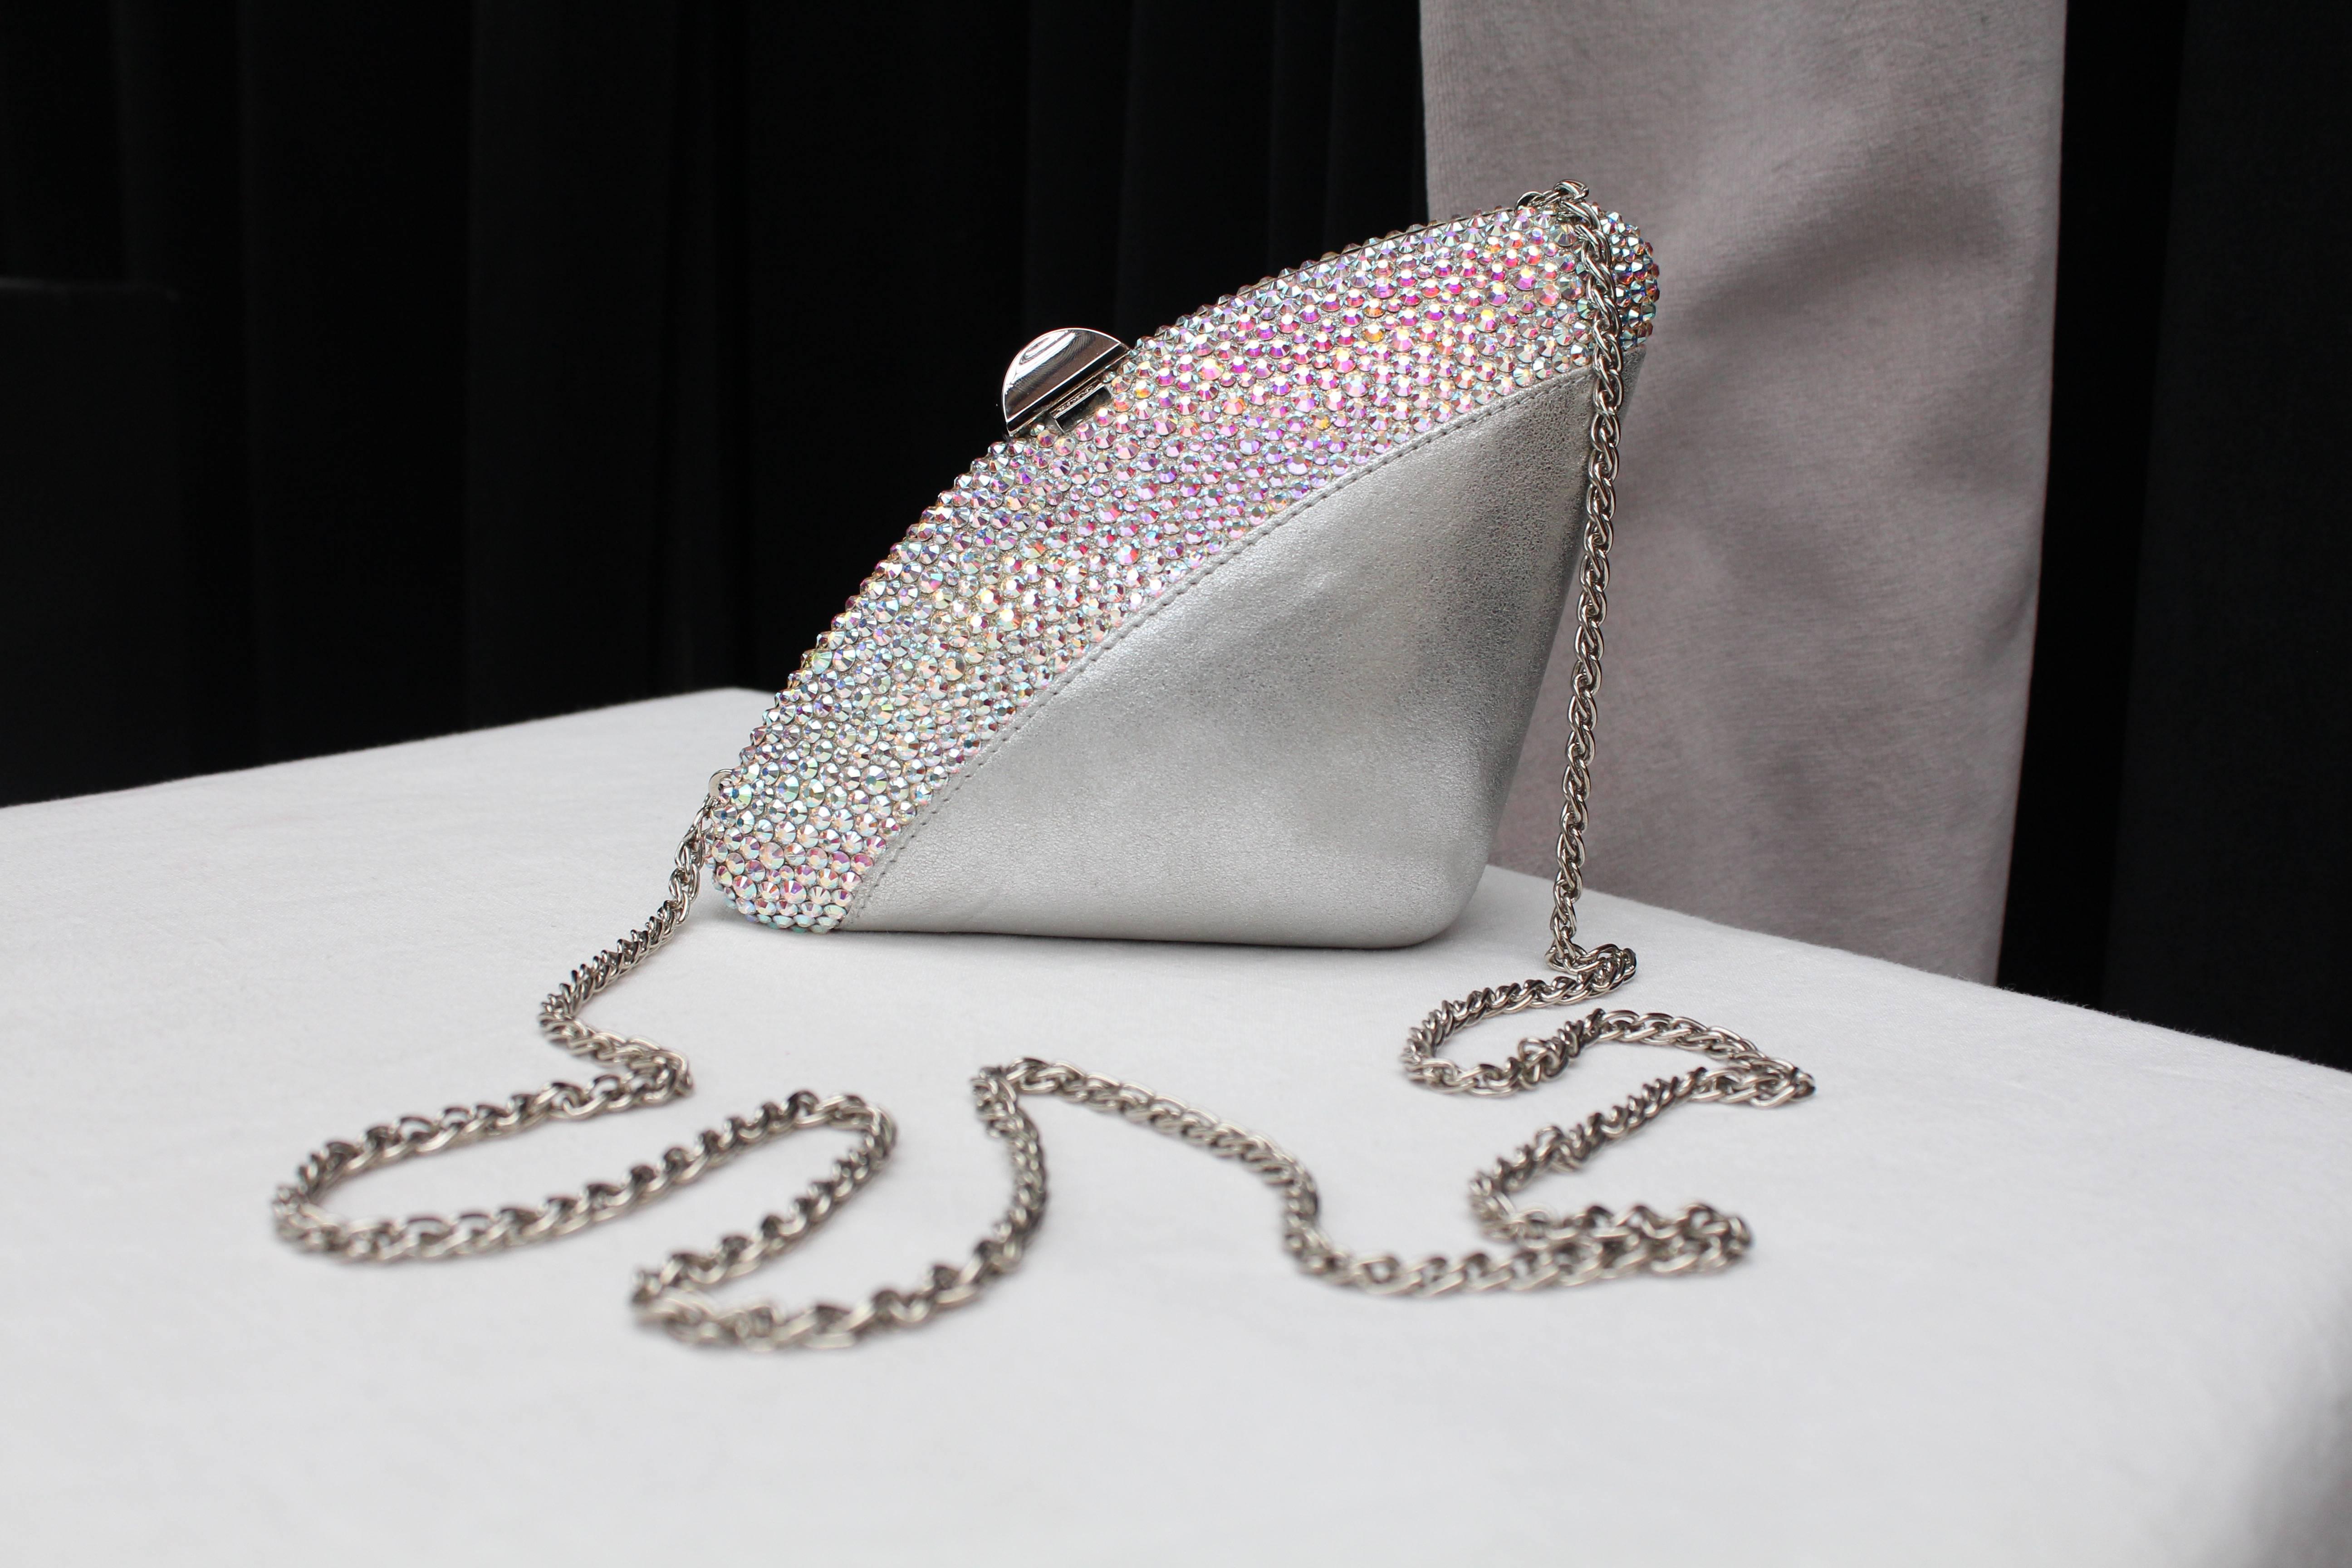 RODO (Made in Italy) Small triangular evening bag composed of silvery leather decorated with sequins. It opens with a push button closure made of silver tone metal stamped with the brand name. Silvery leather lining. It can be worn over the shoulder